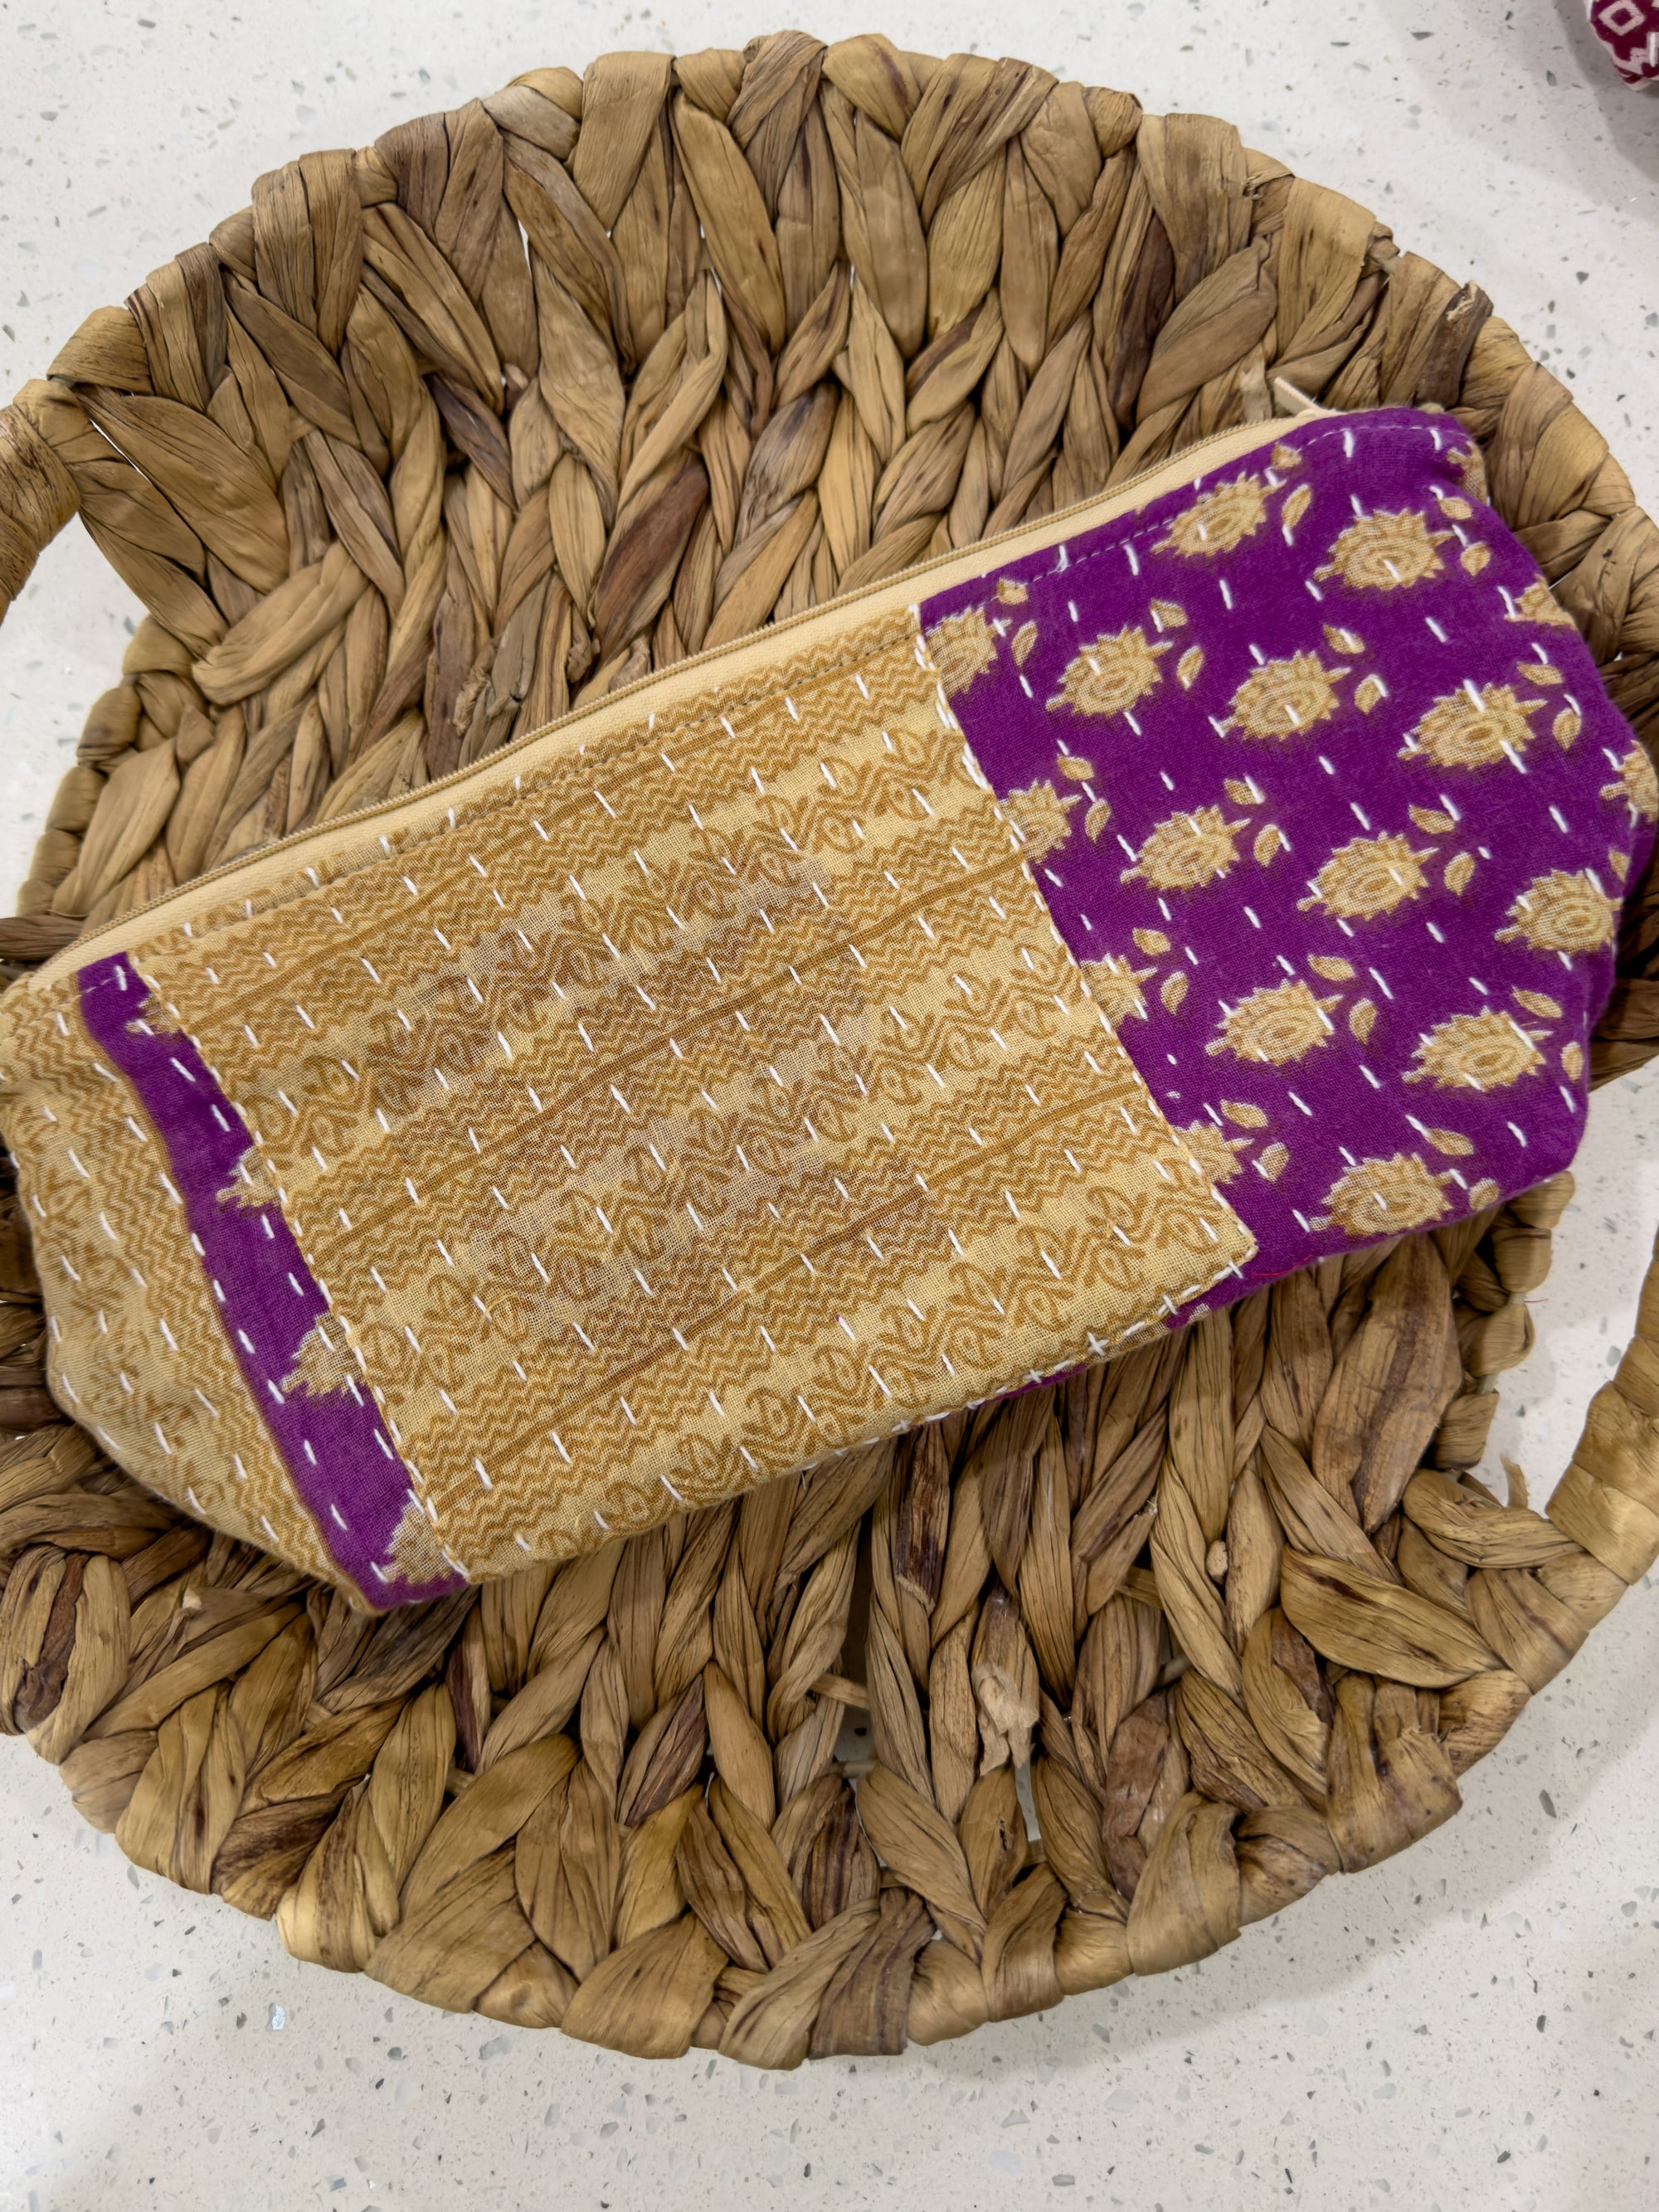 a woven purse sitting on top of a woven basket